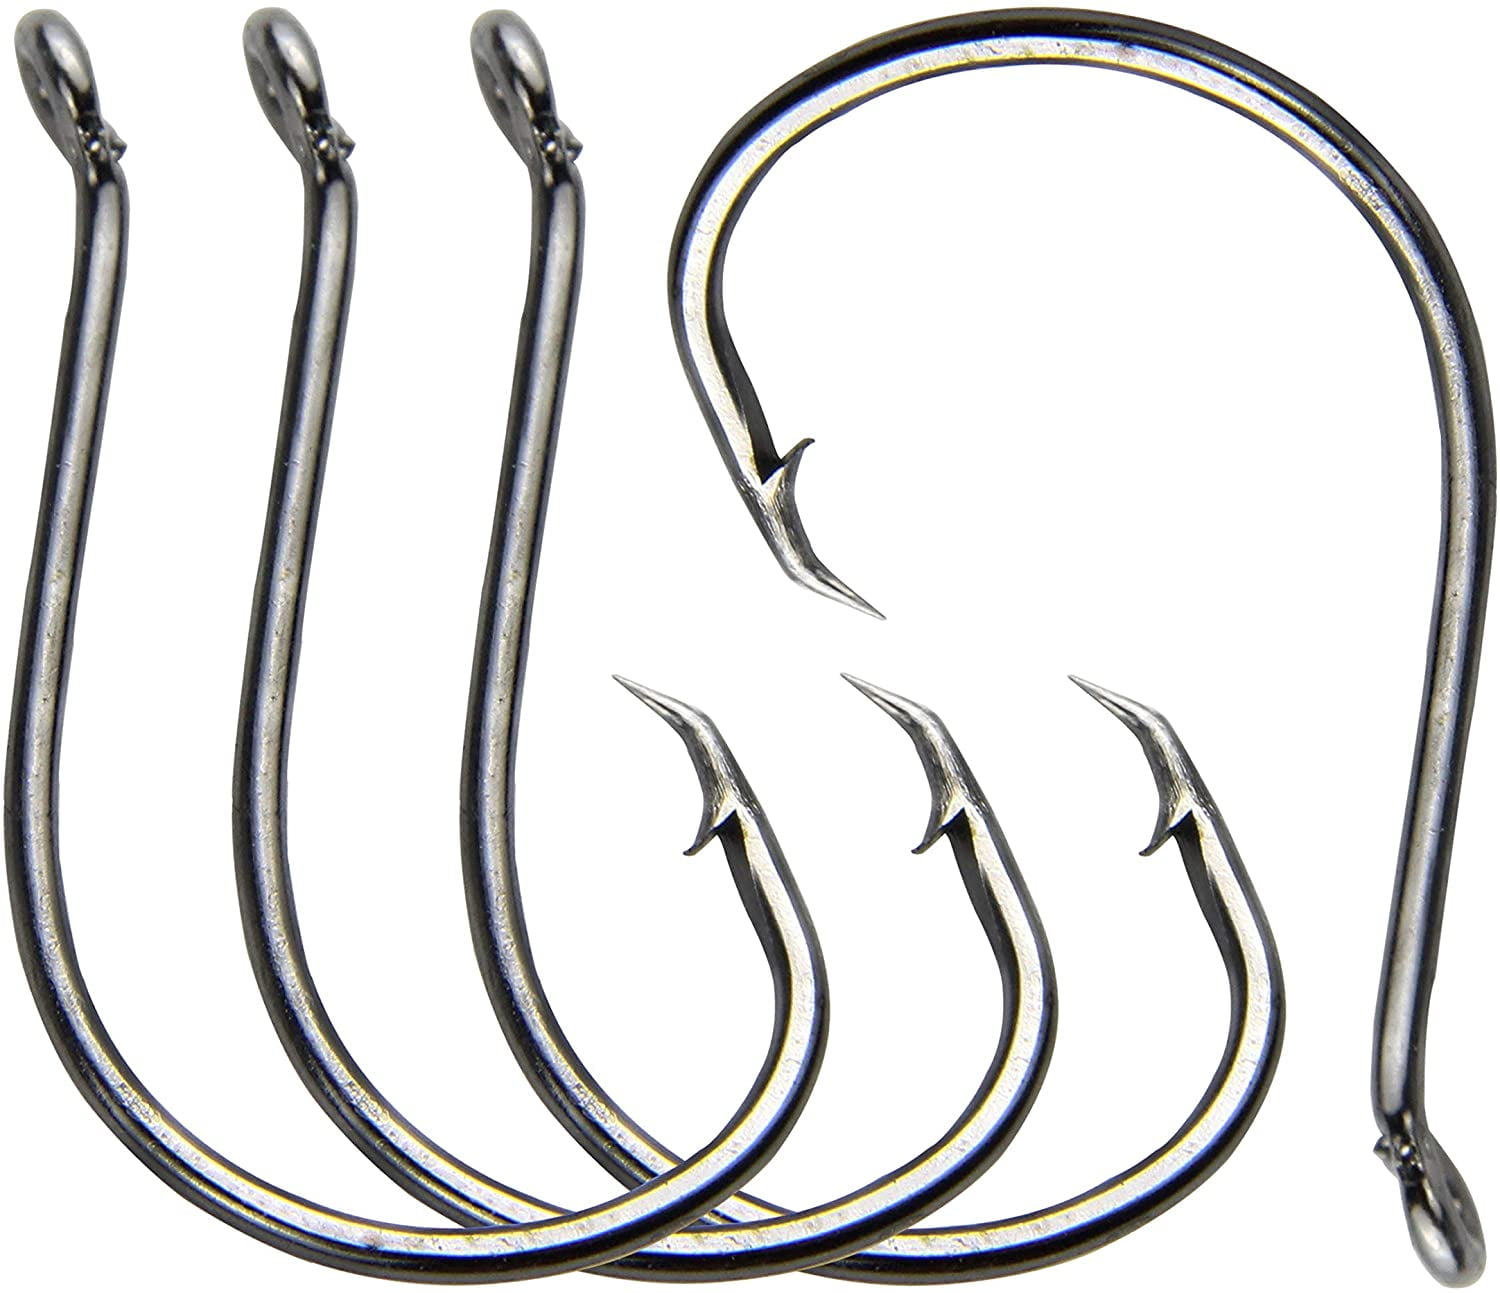 Rite Angler Inline Circle Hook Saltwater Freshwater Offshore Inshore  Fishing Live Bait #1, 2, 1/0, 2/0, 3/0, 4/0, 5/0 Hook Sizes (25 Pack) 